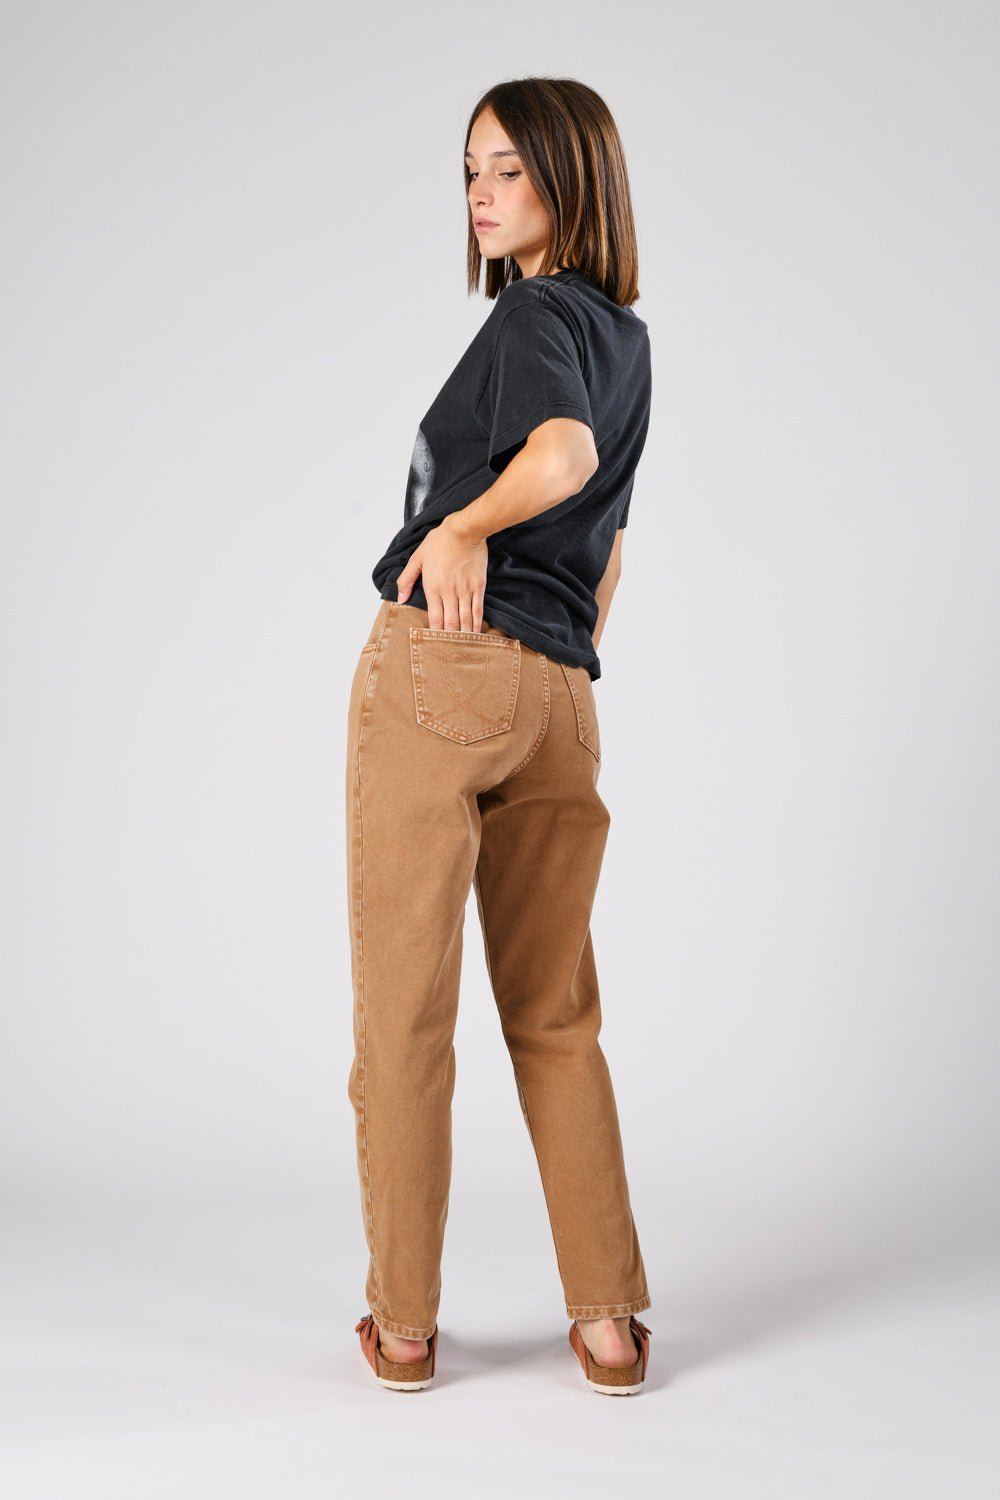 MOM NEVADA 5 pockets tobacco jeans, zip and button closure. Mum fit. 100% cotton. Made in Italy. HTC LOS ANGELES